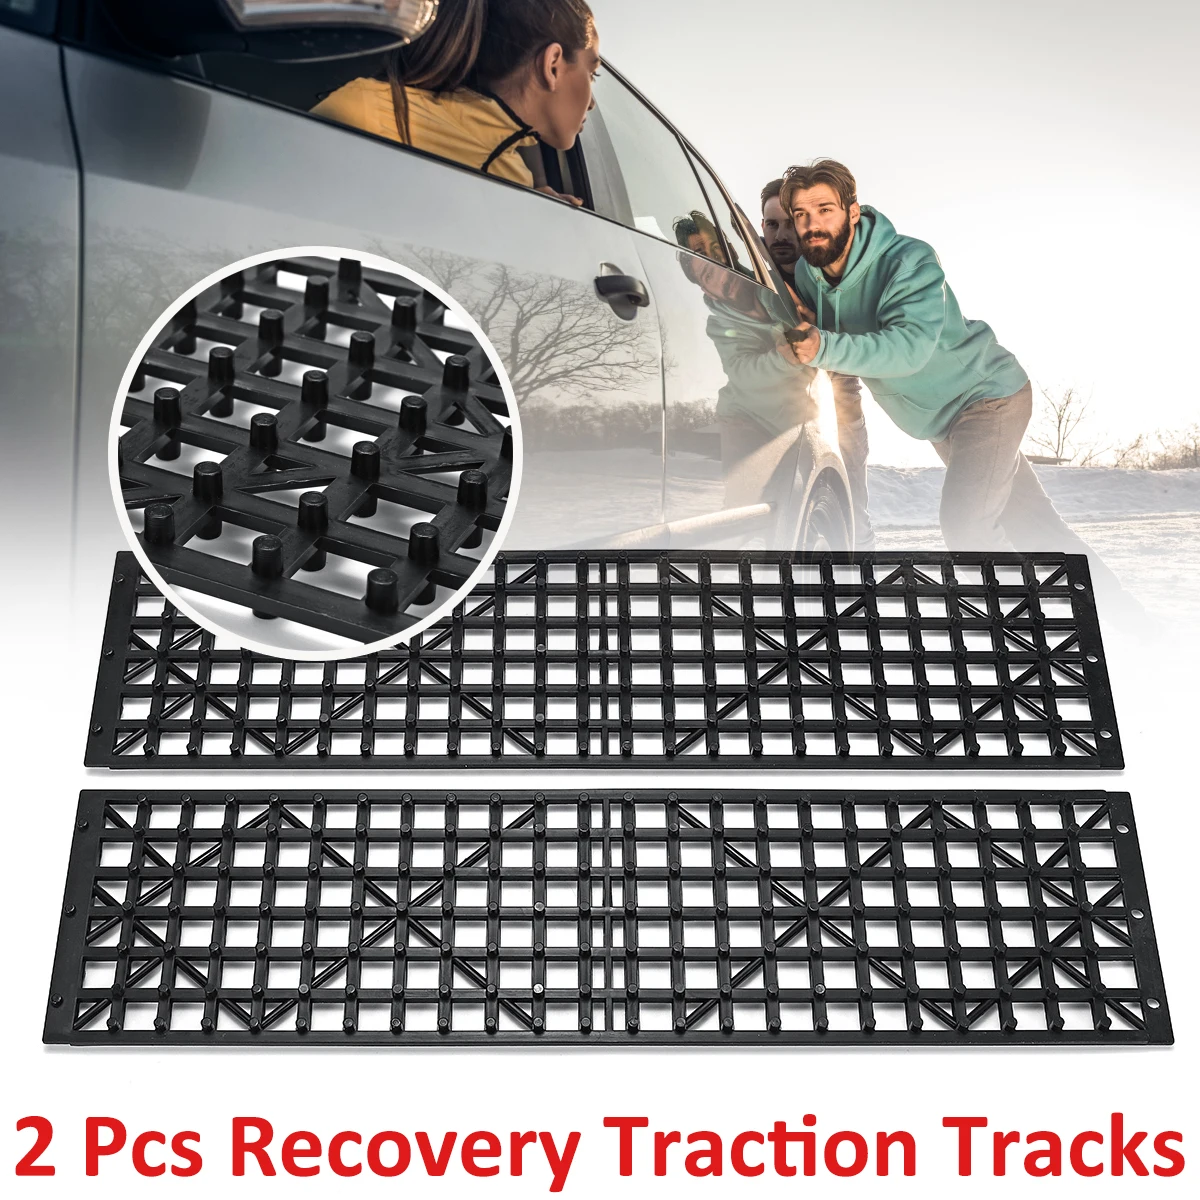 A2Pcs Car Road Trouble Clearer Auto Vehicle Truck Winter Snow Chains Mud Tires Recovery Traction Mat Wheel Chain Non-slip Tracks |